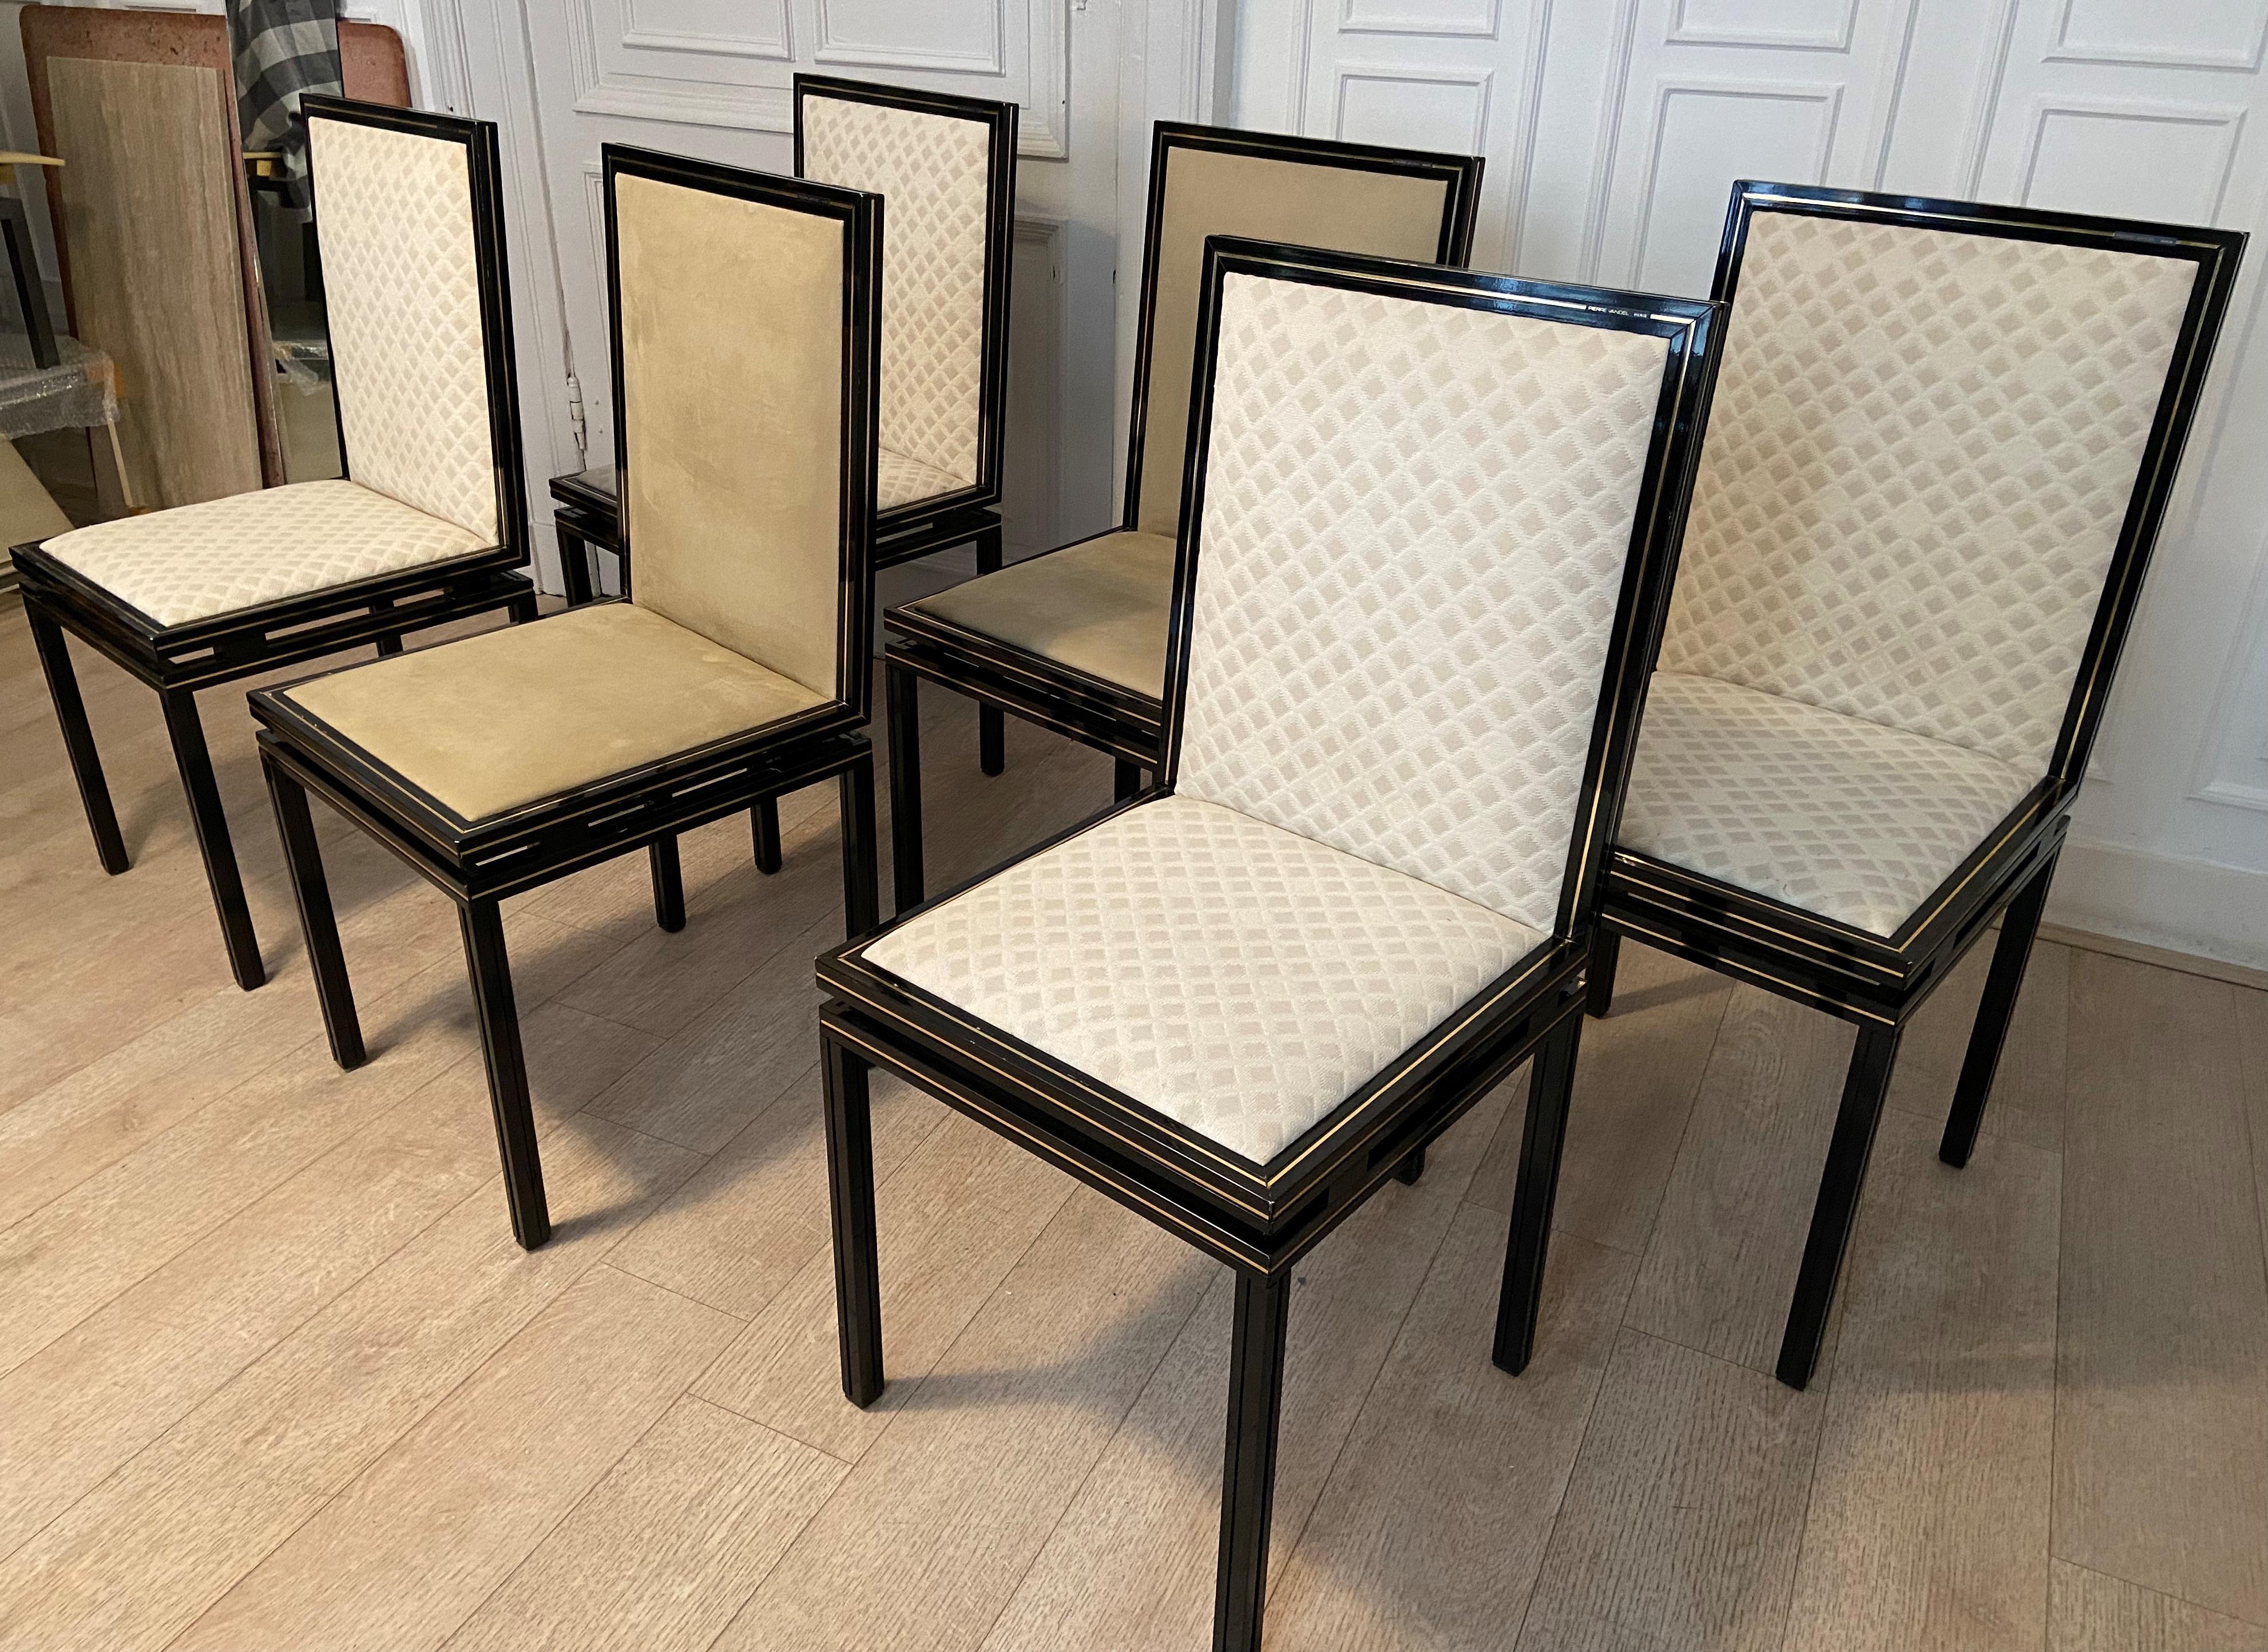 Mid-Century Modern Dining Room Chairs by Pierre Vandel, France 1970s Set of 4+2 For Sale 1